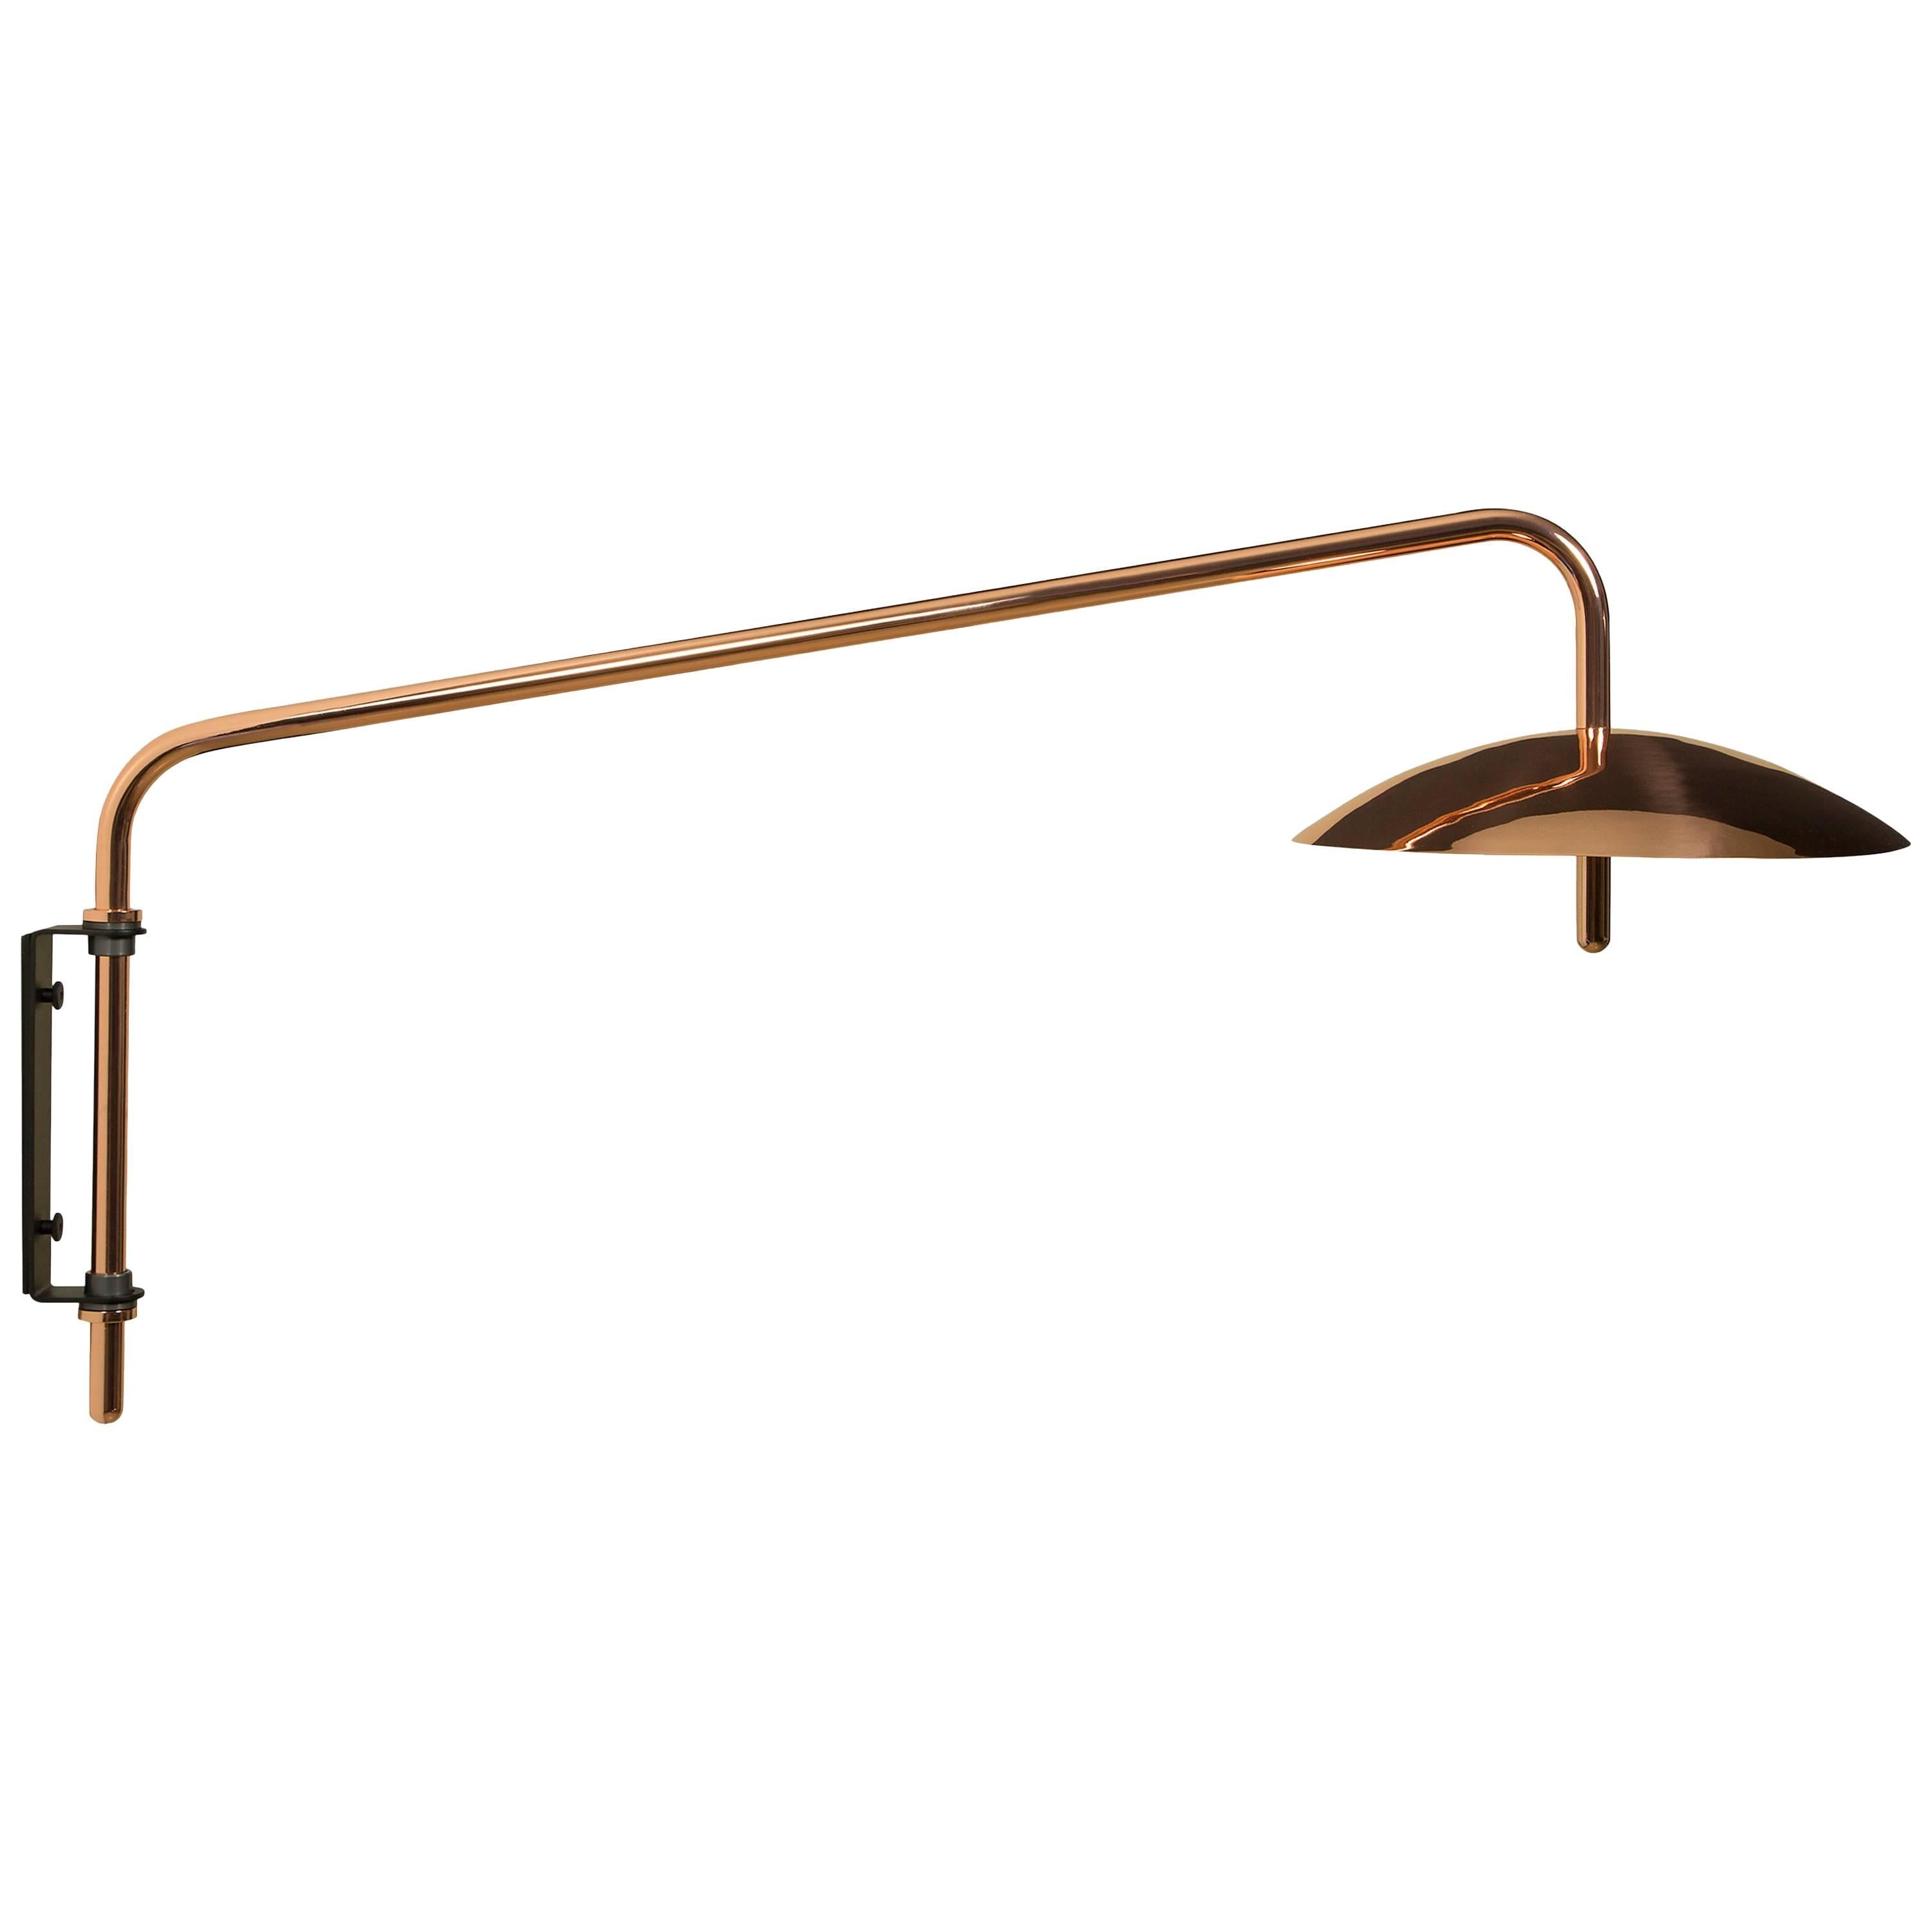 Contemporary Signal Swing Arm Sconce in Nickel, Long, Hardwire, from Souda, Made to Order For Sale